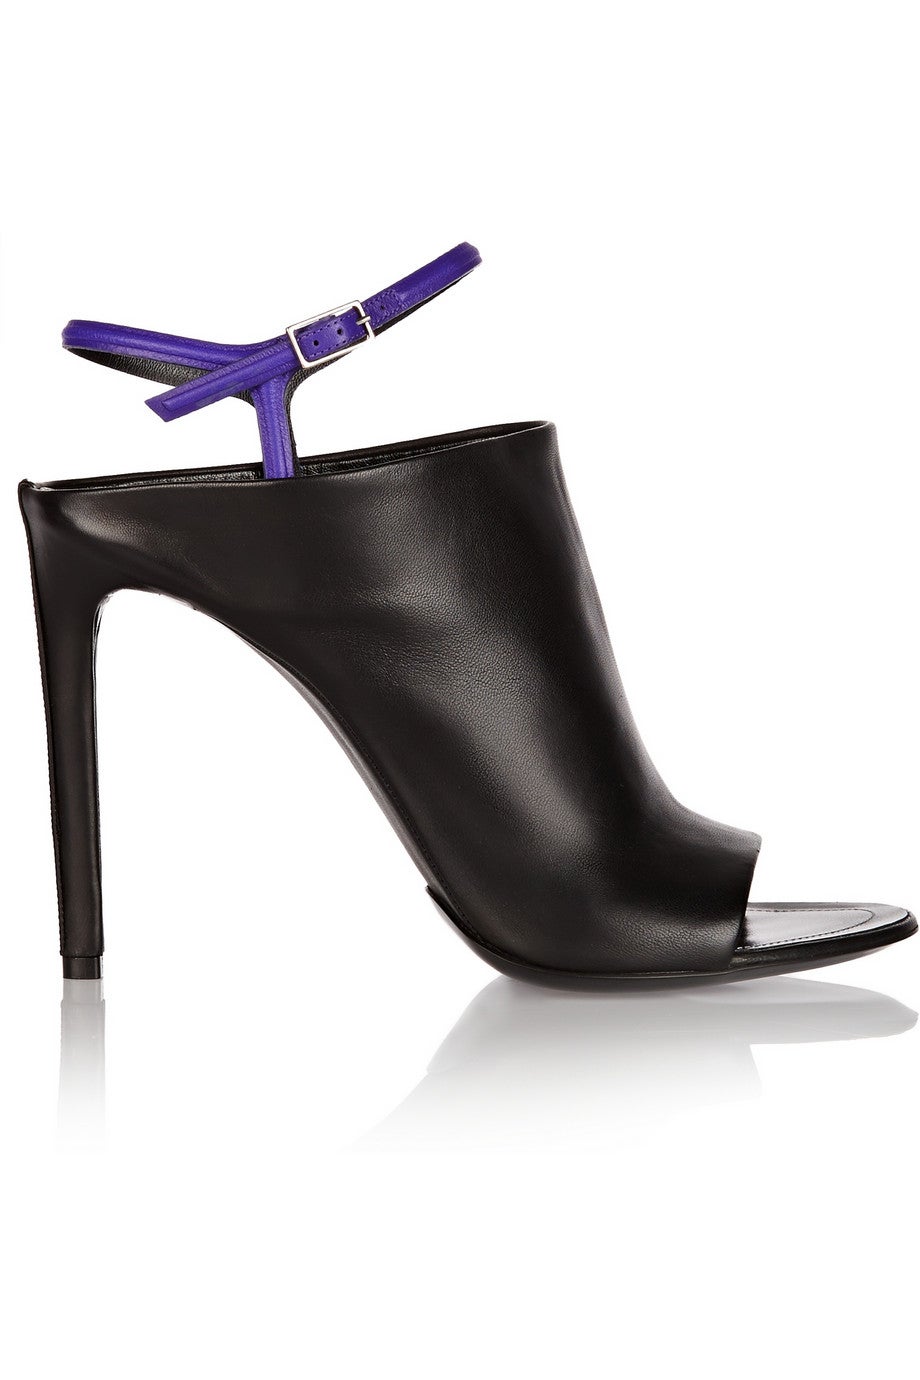 20 Heels That Basically Go With Anything